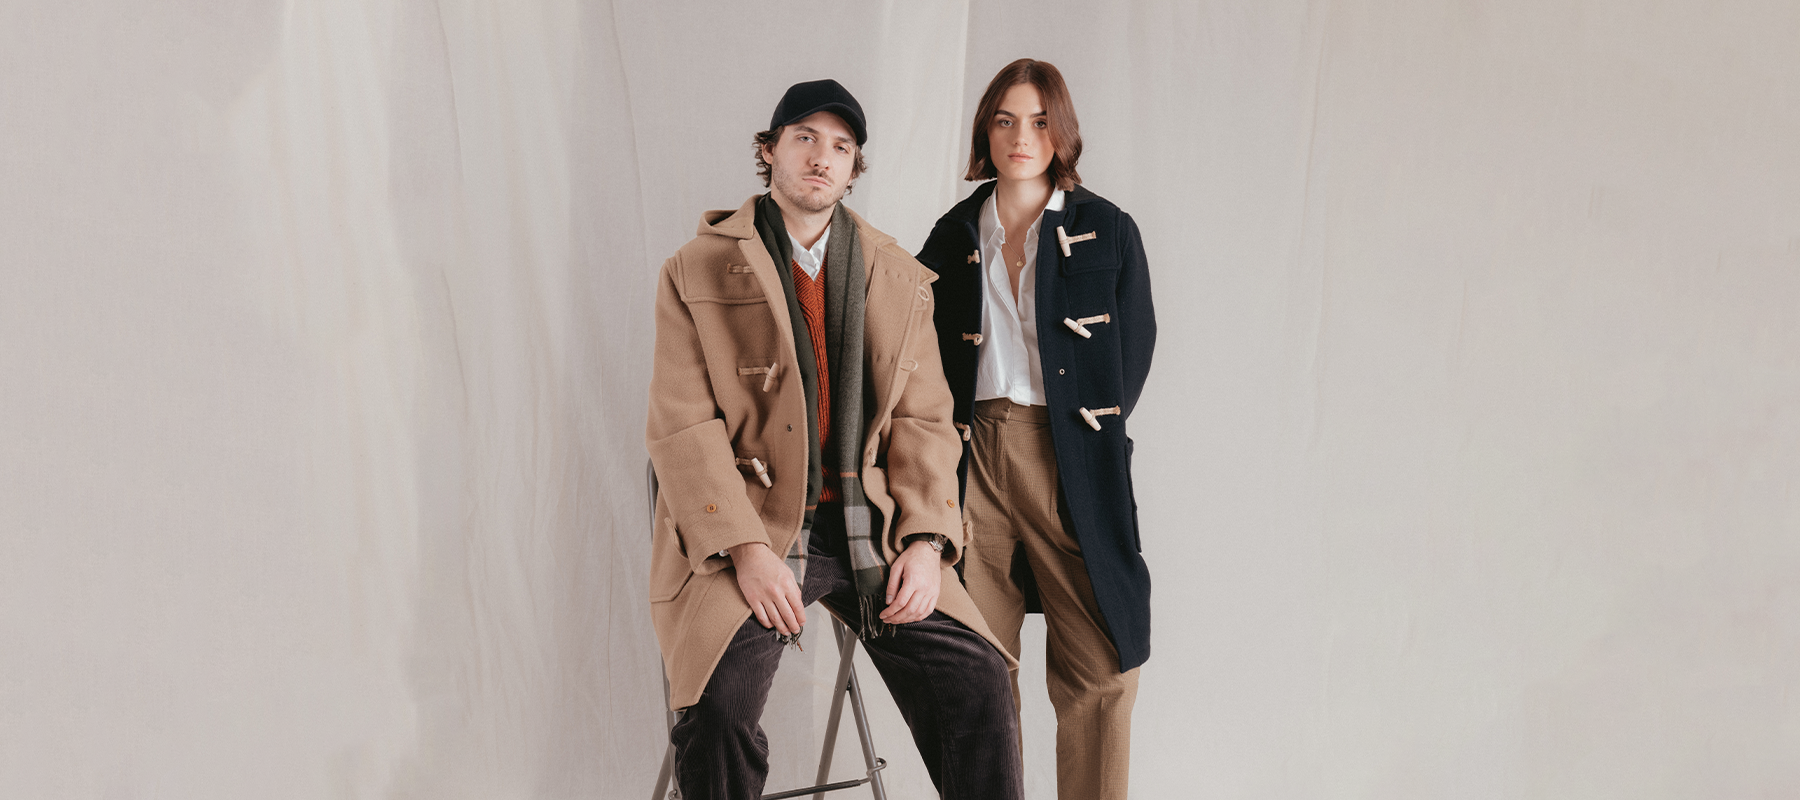 Duffle Coats | Authentic British Design Since 1951 - Gloverall 